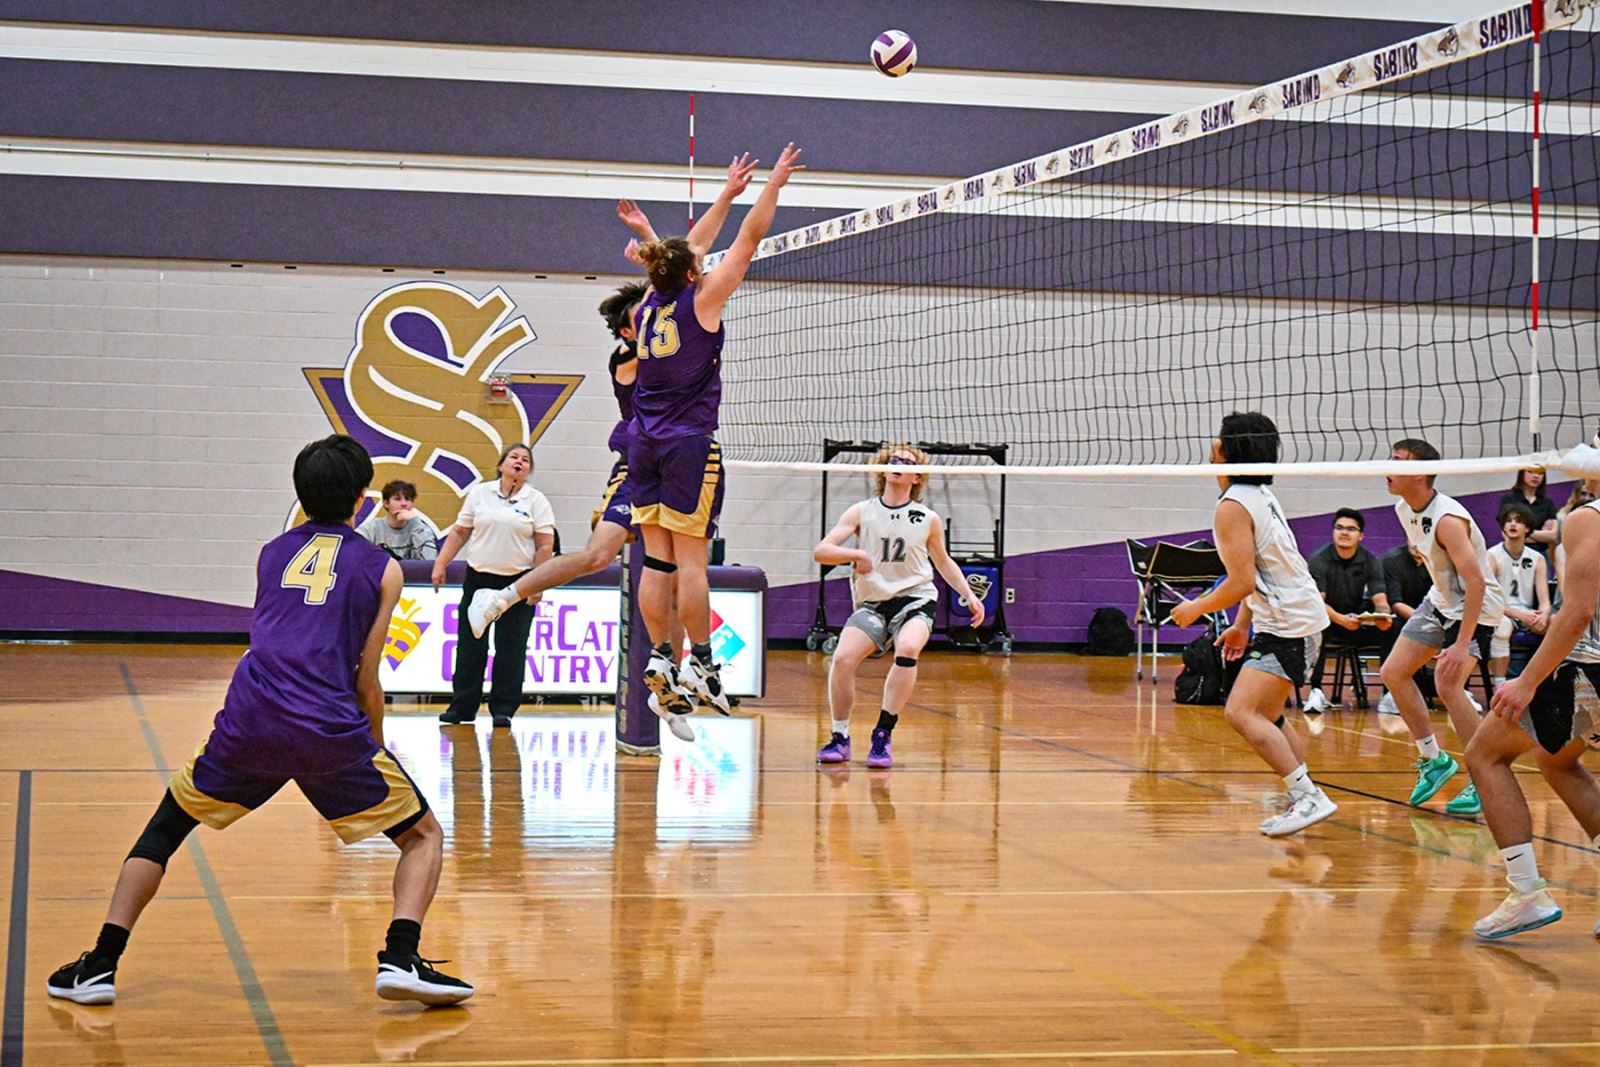 Sabino players spike the volleyball over the net